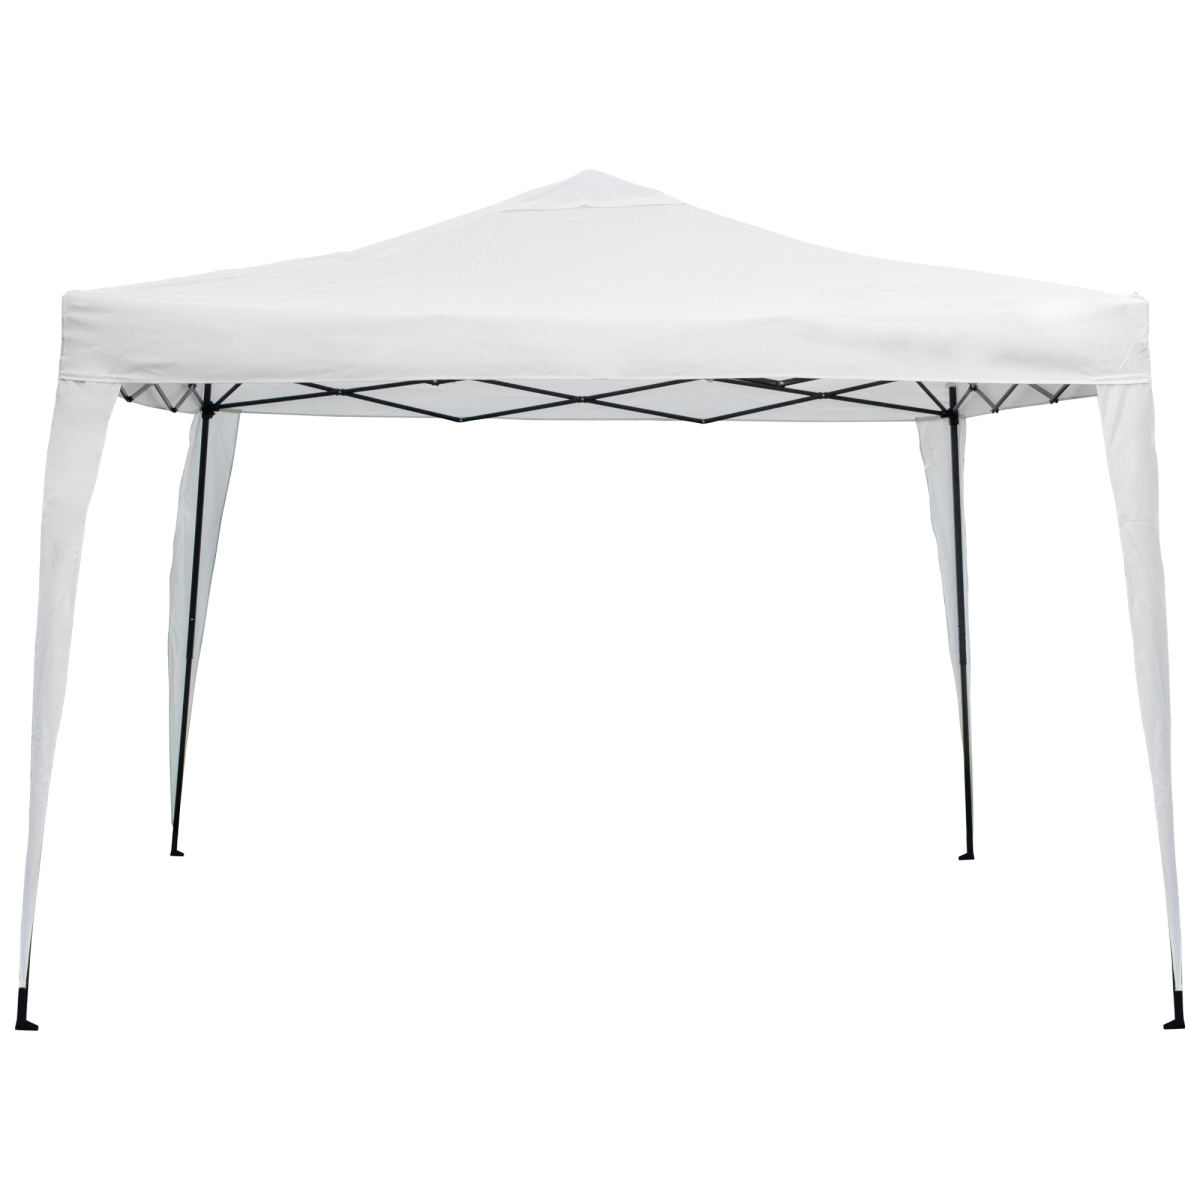 Northlight 35127432 10 x 10 ft. Off White Pop-Up Outdoor Canopy Gazebo